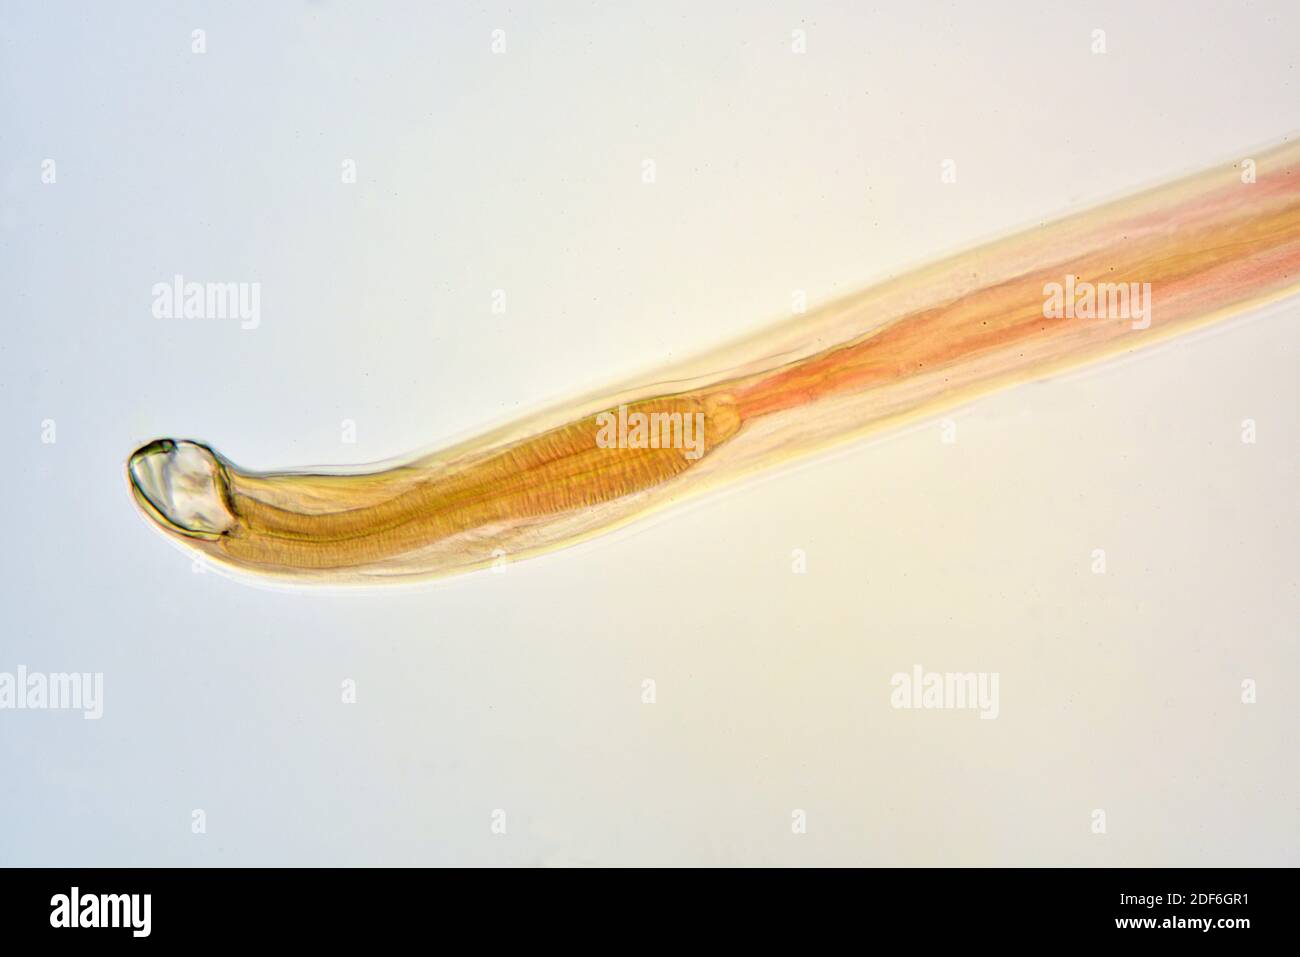 tapeworm under a microscope